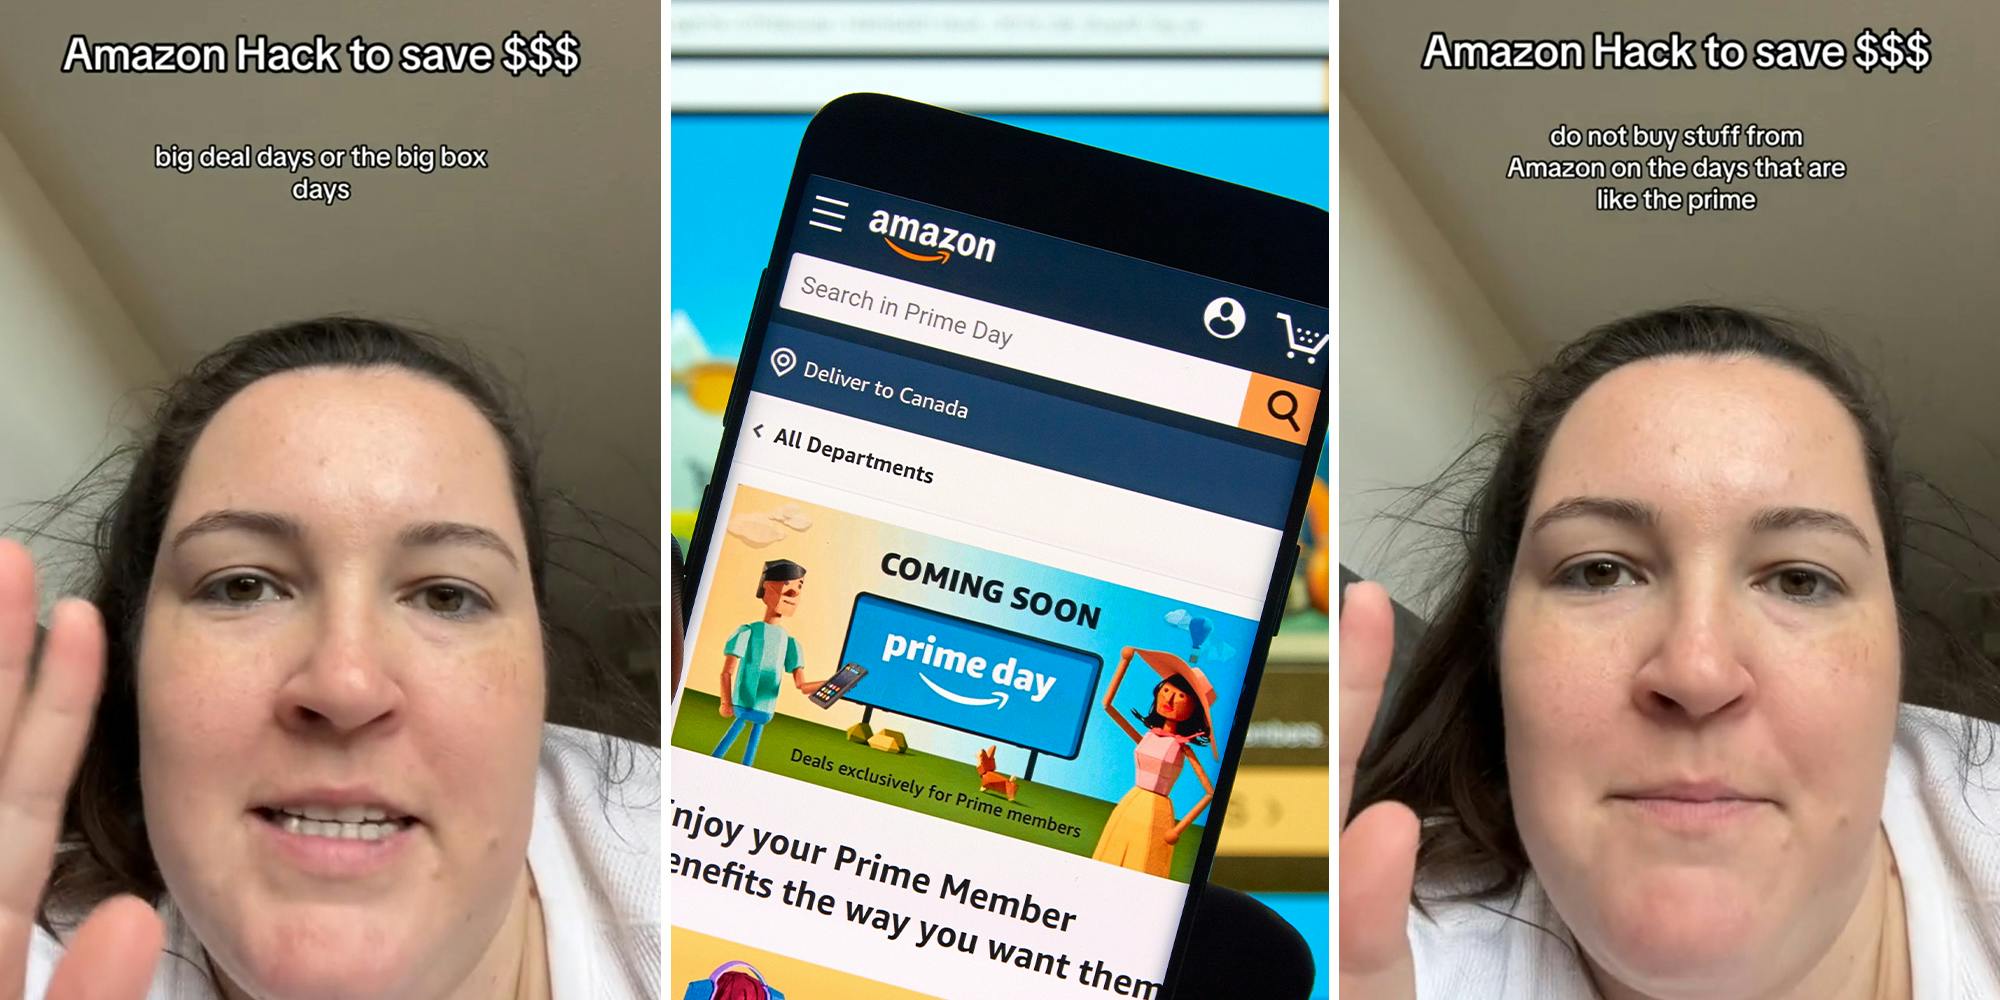 Amazon customer shares hack for how to actually save money instead of buying during sales